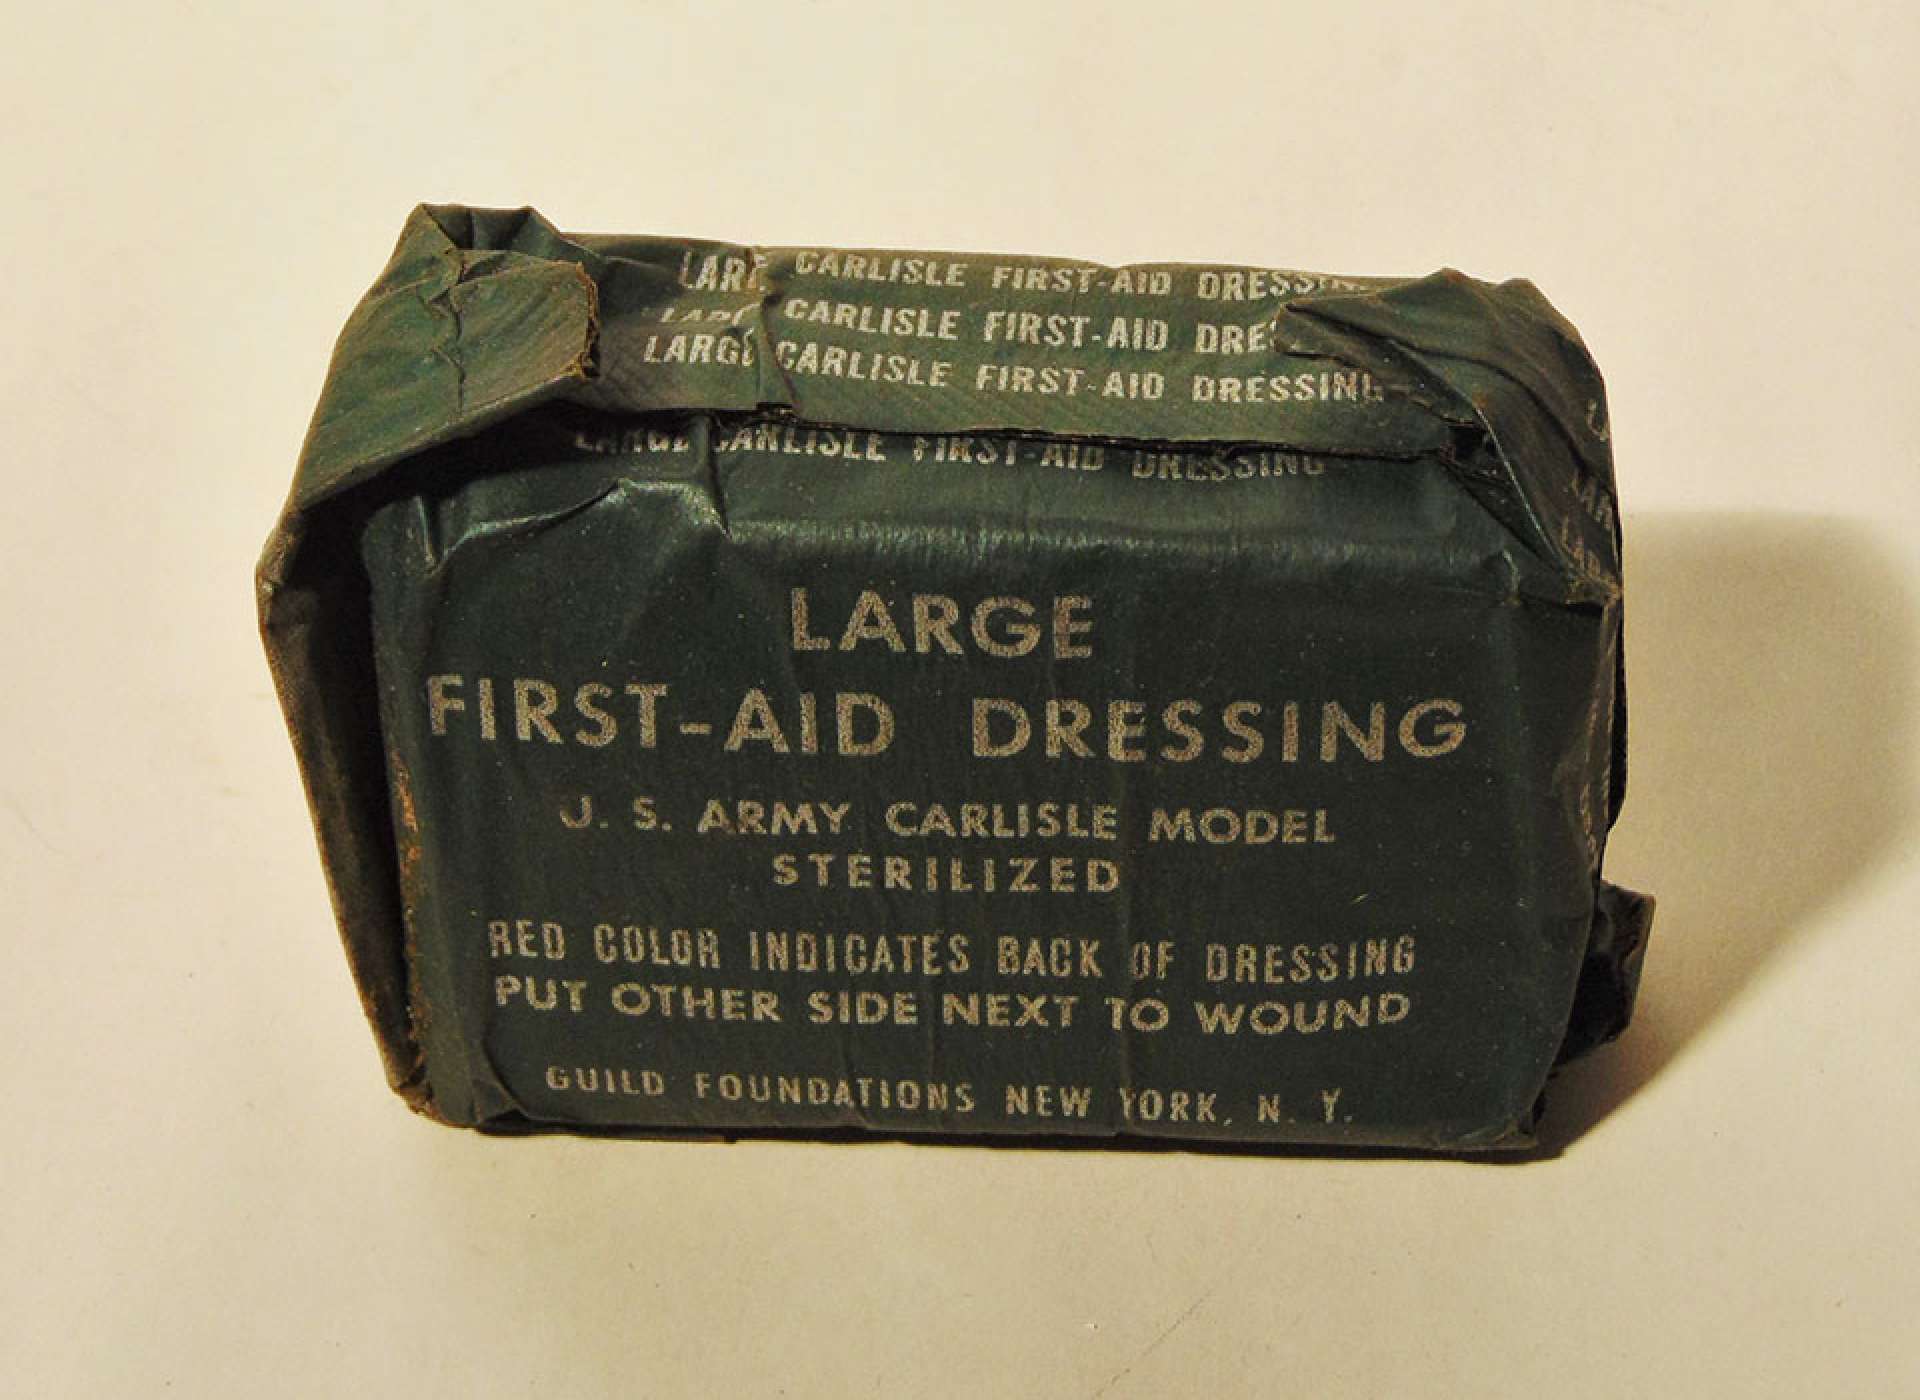 The Carlisle kit was a bandage package in a pouch carried by all soldiers on their belt.